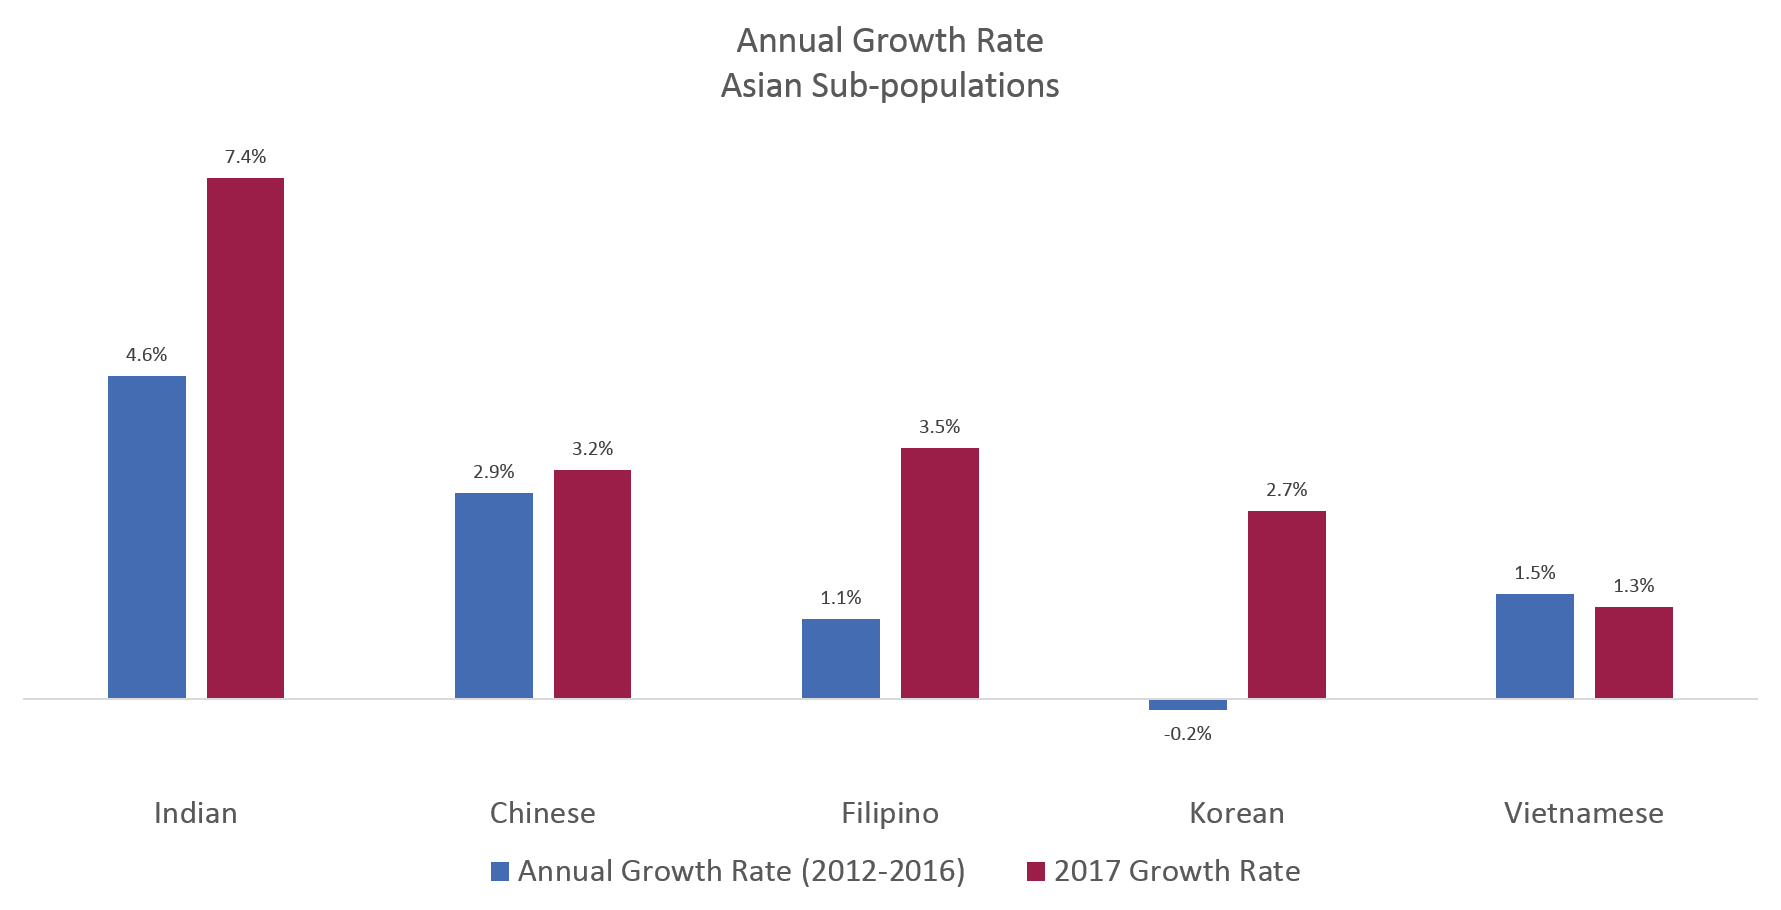 Annual growth rate in Asian subpopulations